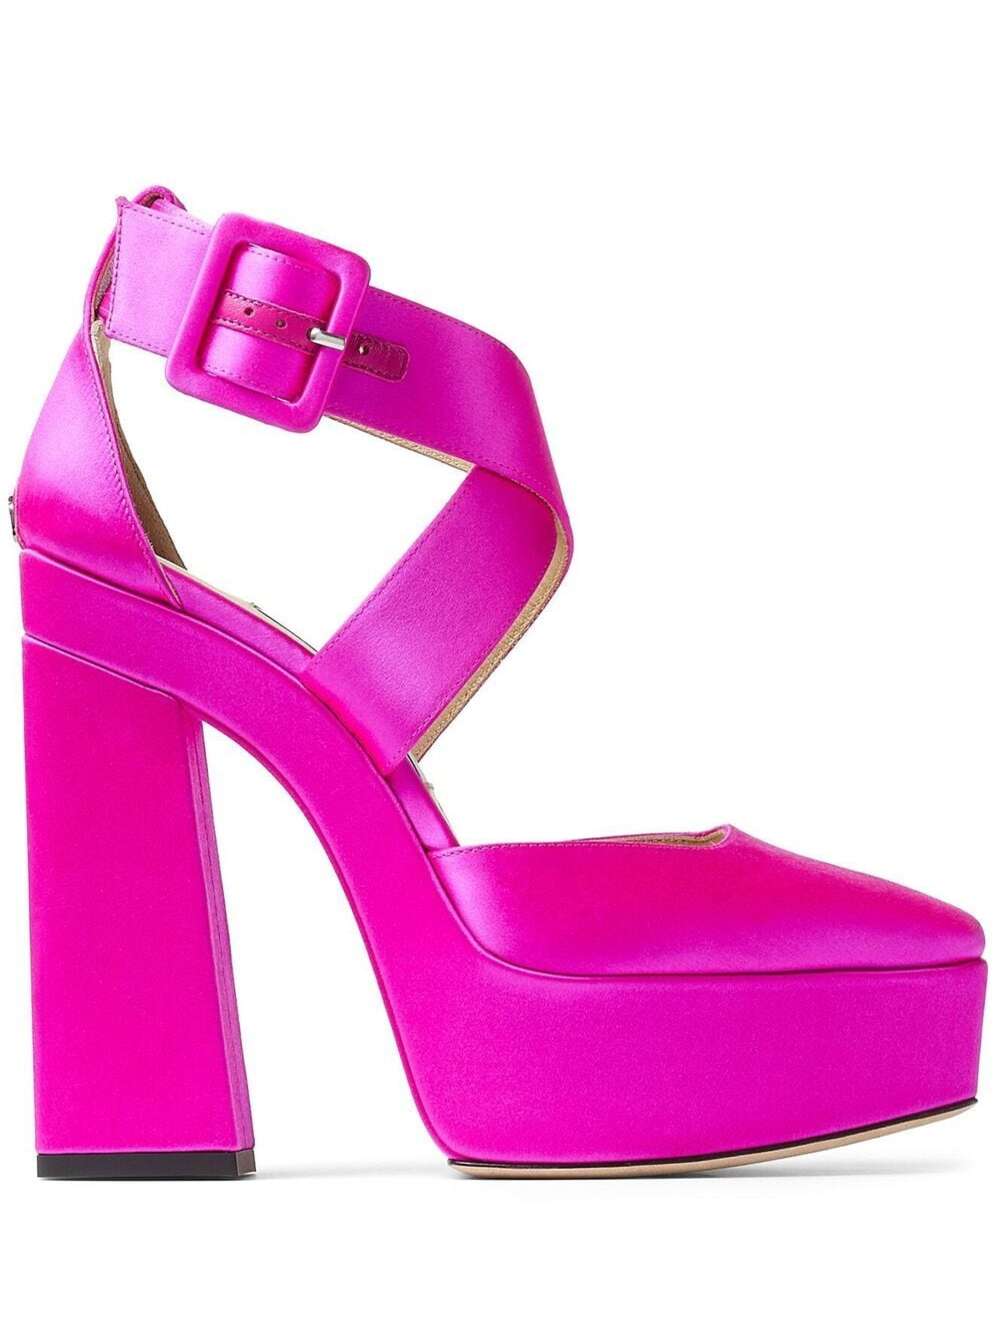 Fuchsia Pink Gian Platform Pumps In Satin And Leather Woman